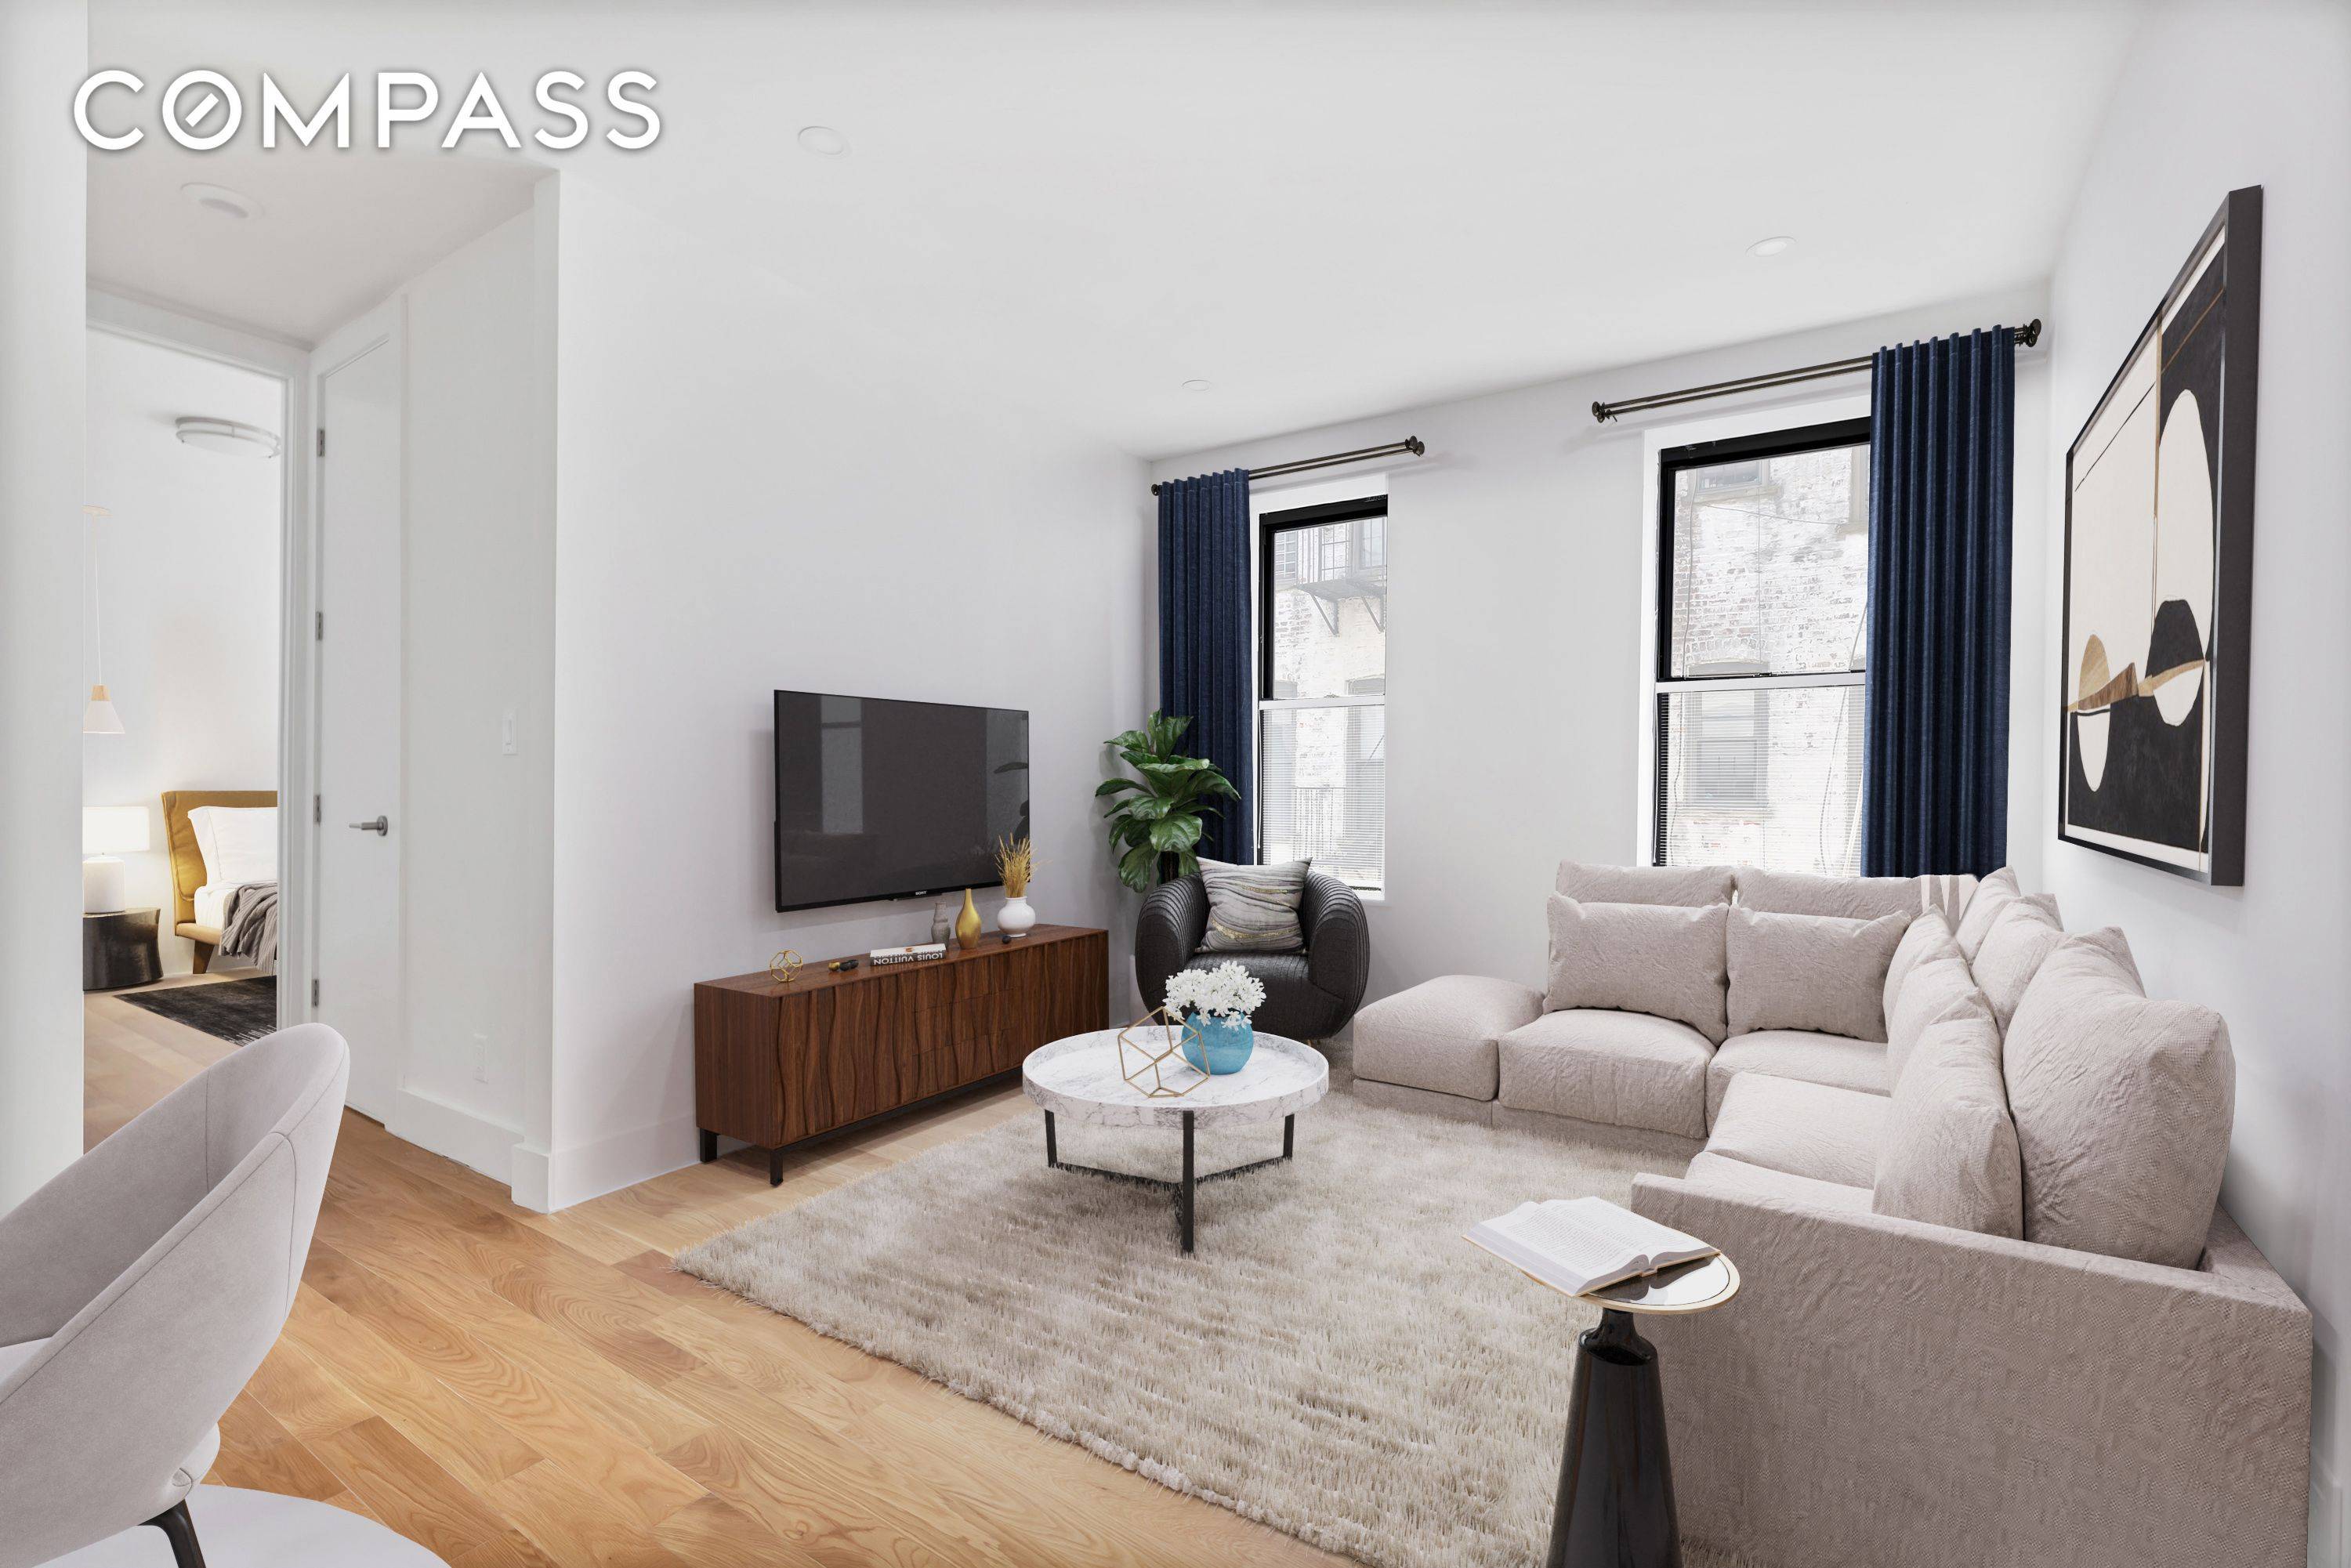 Located at the nexus of Brooklyn s Ditmas Park and Kensington neighborhoods, The Commodore Condominiums are a unique conversion of pre war residences, redesigned for contemporary living.